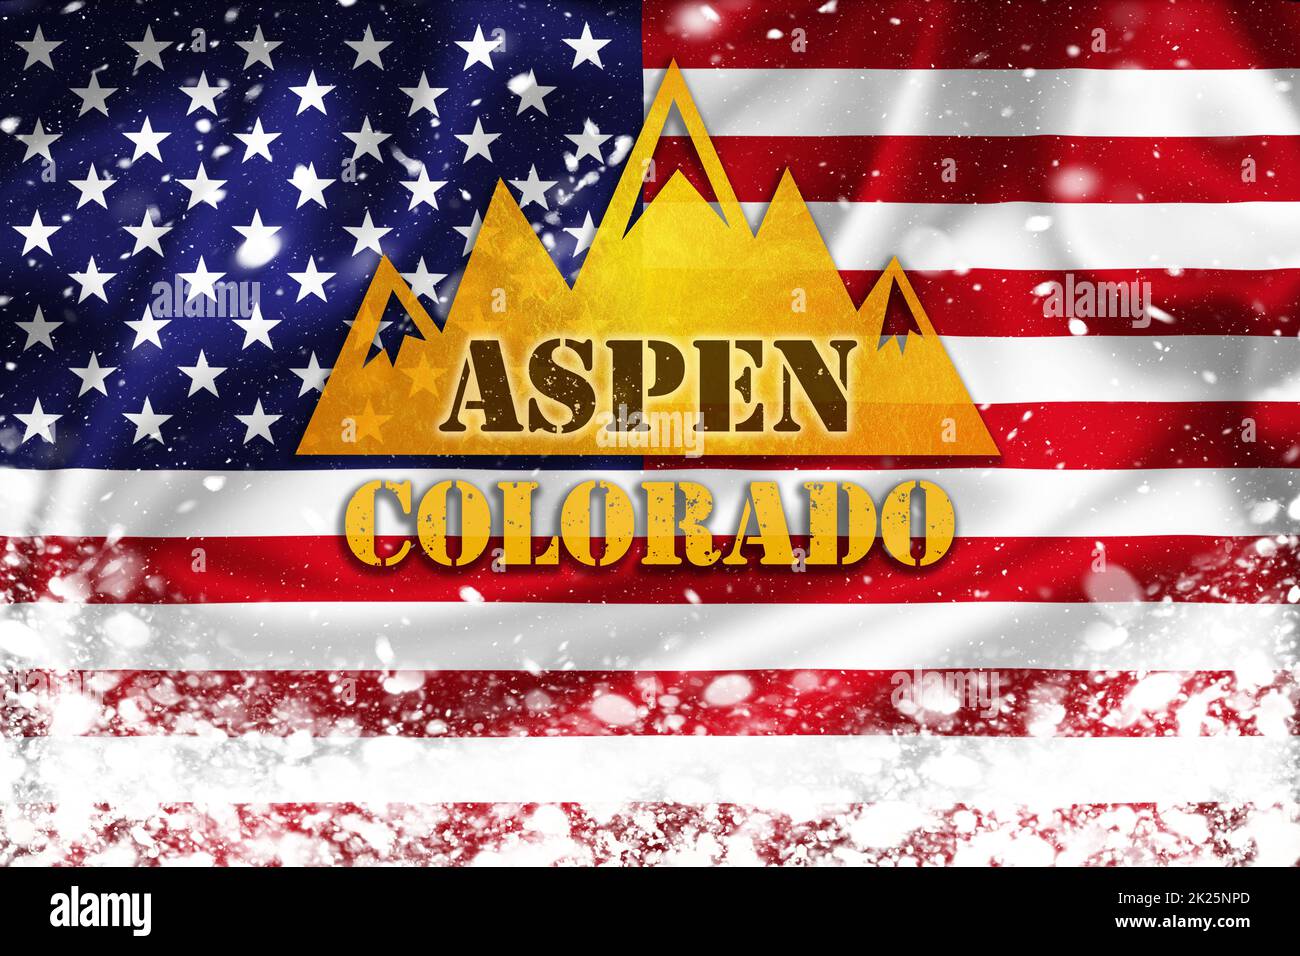 Aspen Colorado banner illustration on US flag and snow layer Stock Photo